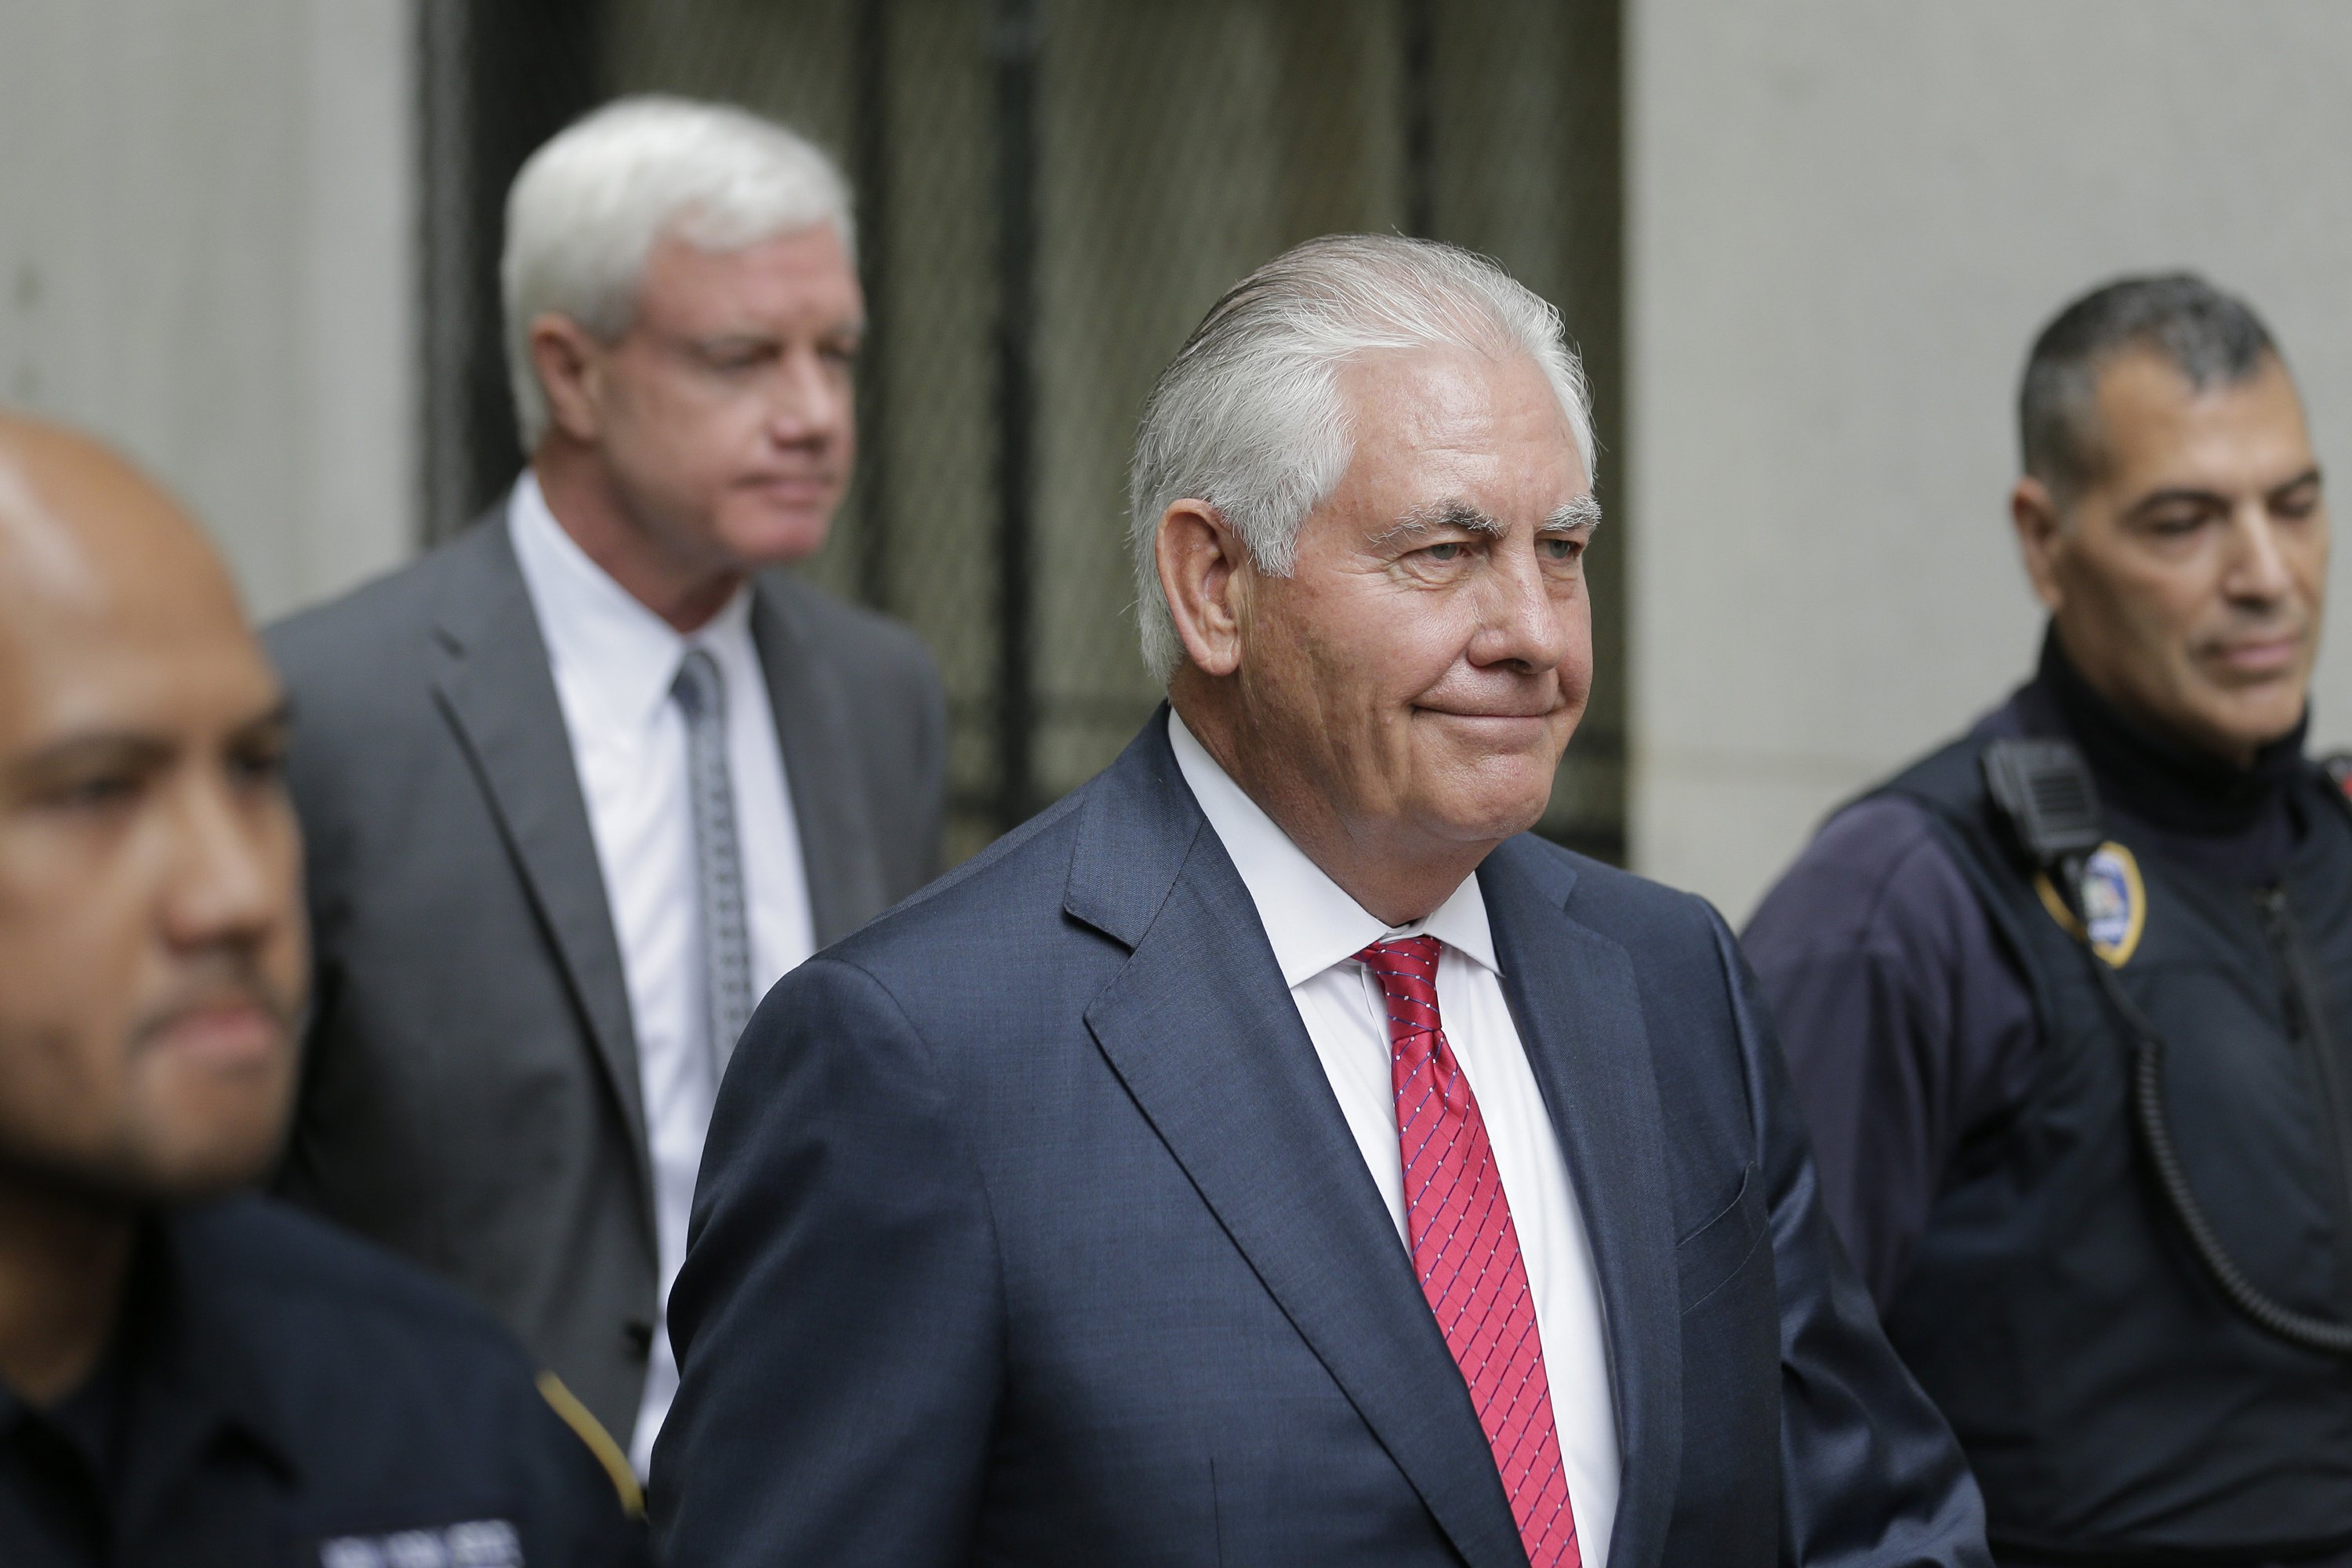 Tillerson: Exxon aimed to know, not lowball, climate effects - The Associated Press